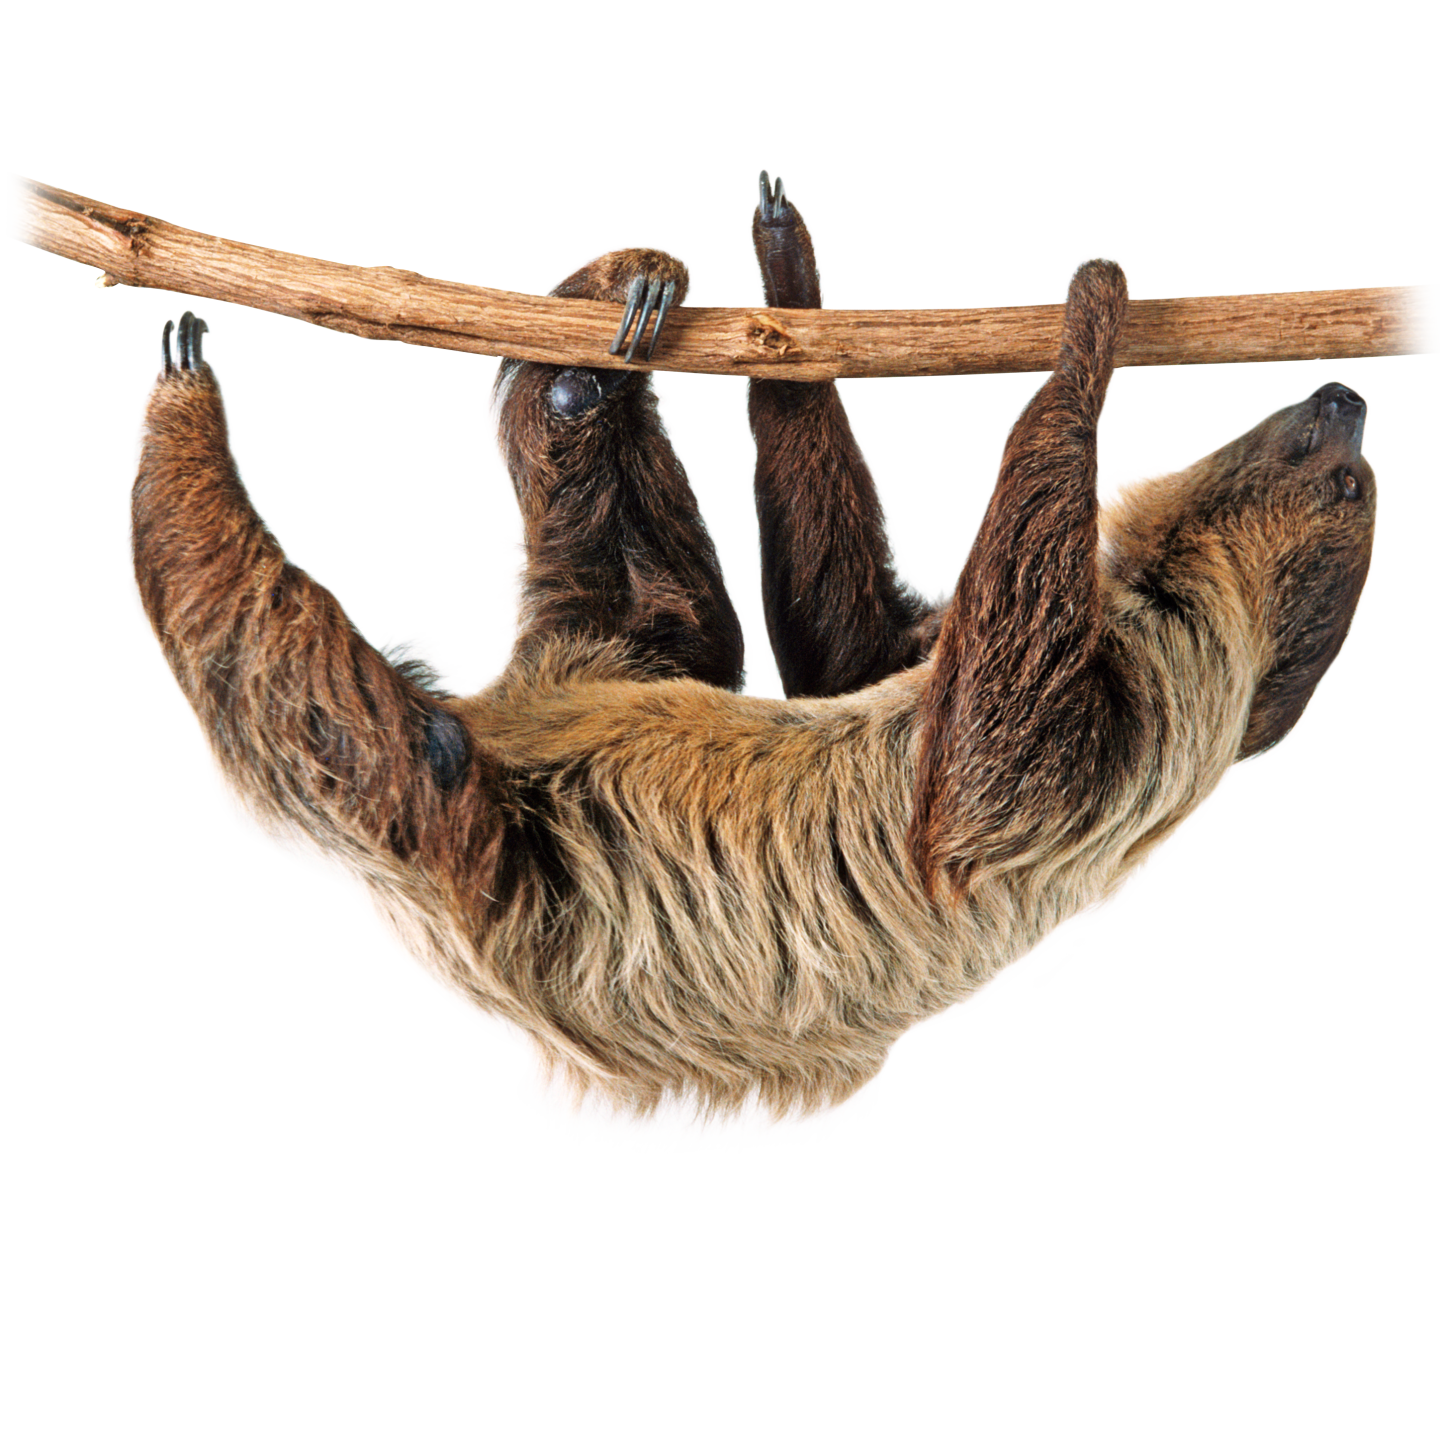 Free Sloth PNG Transparent Images, Download Free Clip Art, Free Clip